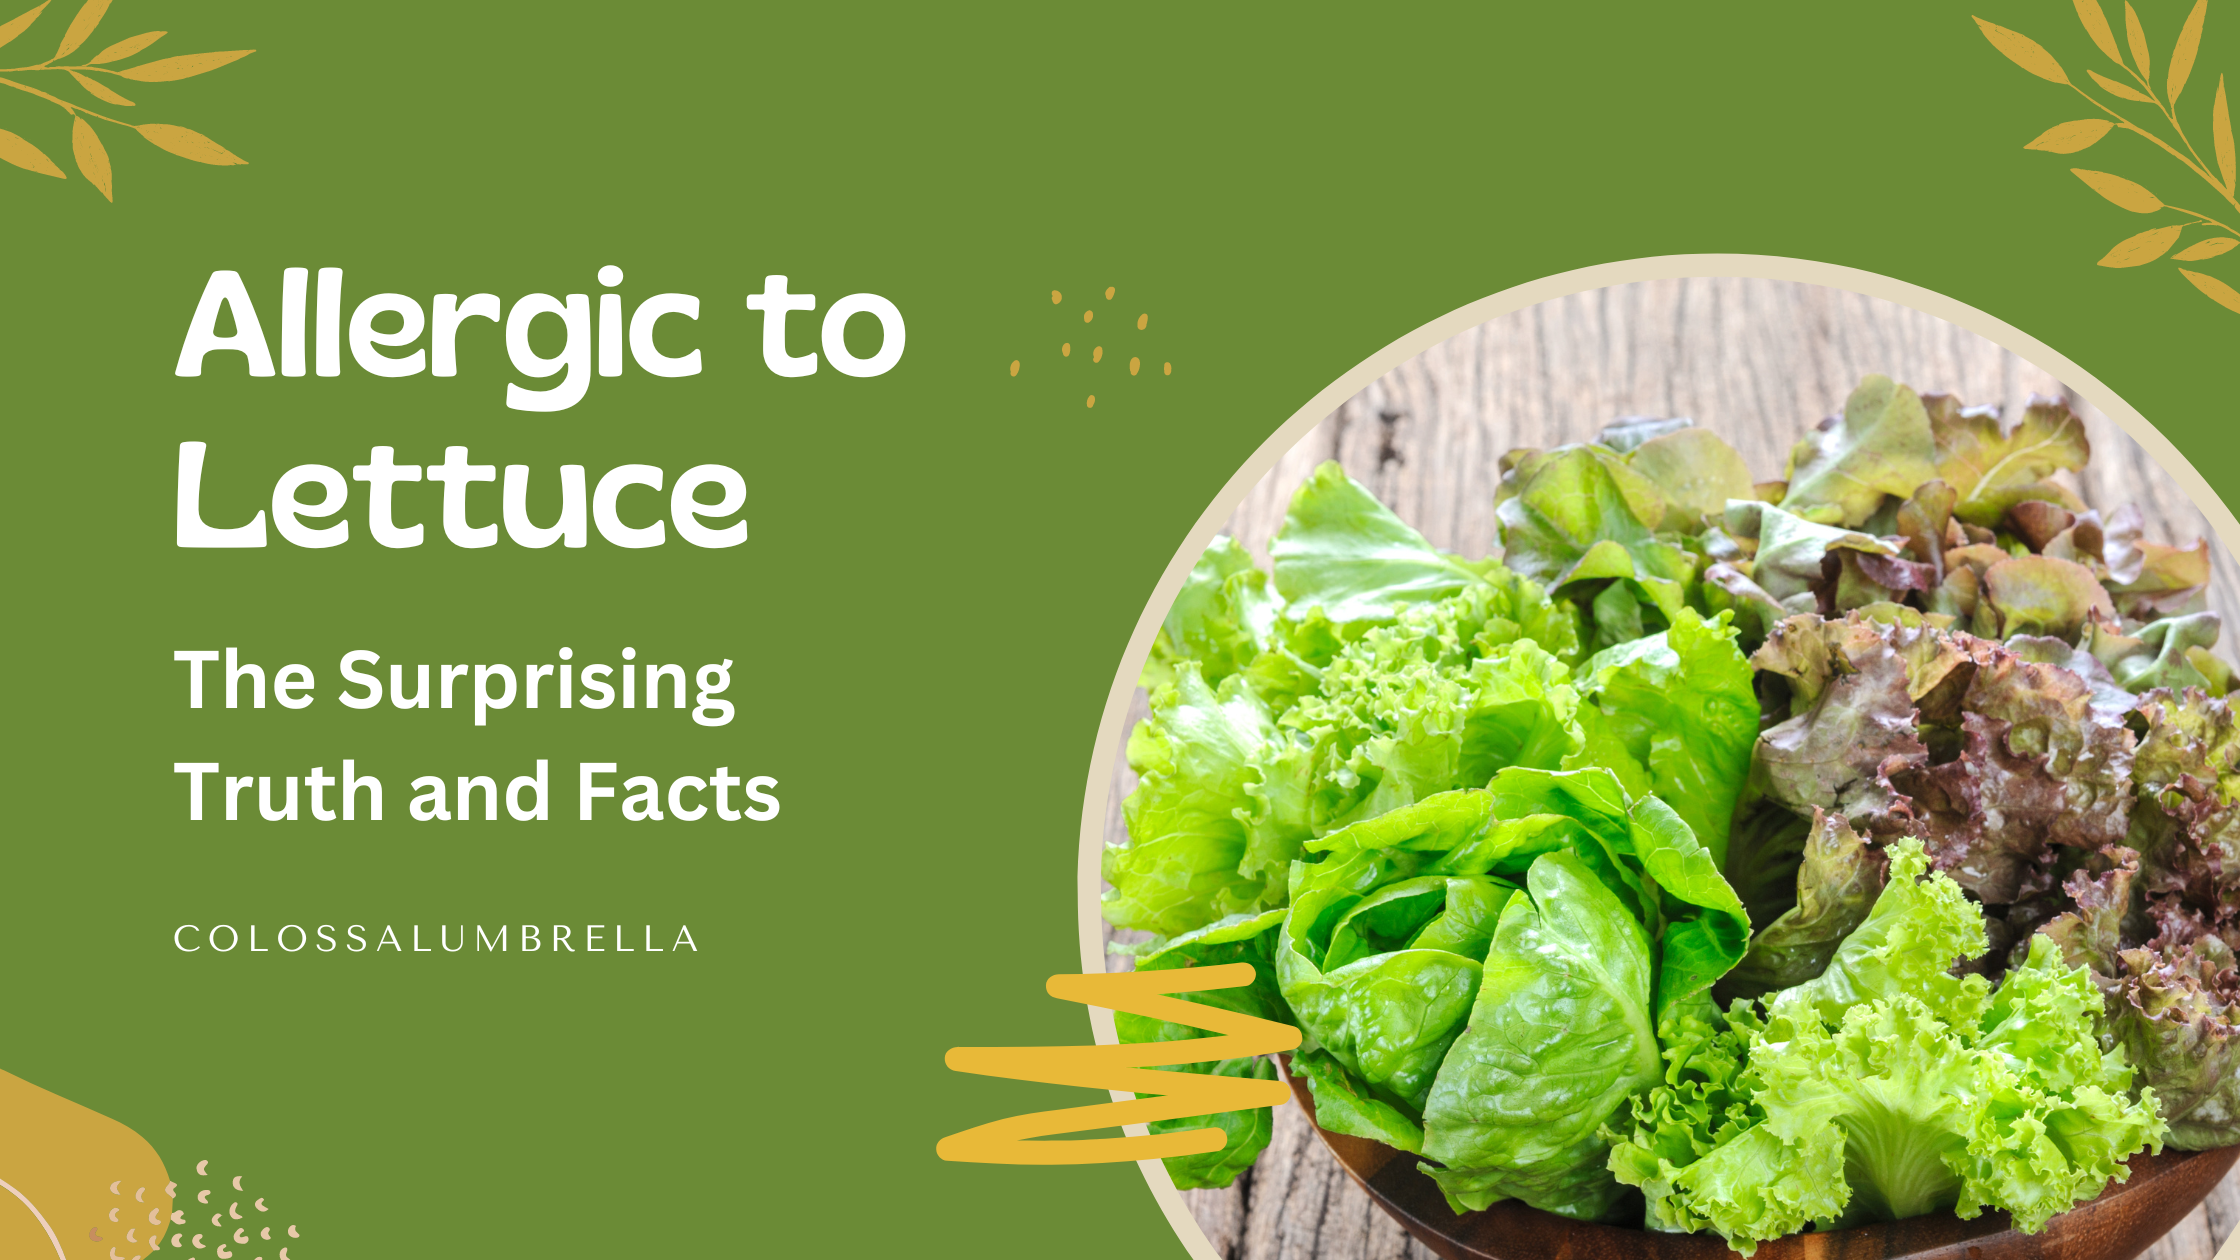 Know all facts and details about Allergic to Lettuce by Colossalumbrella